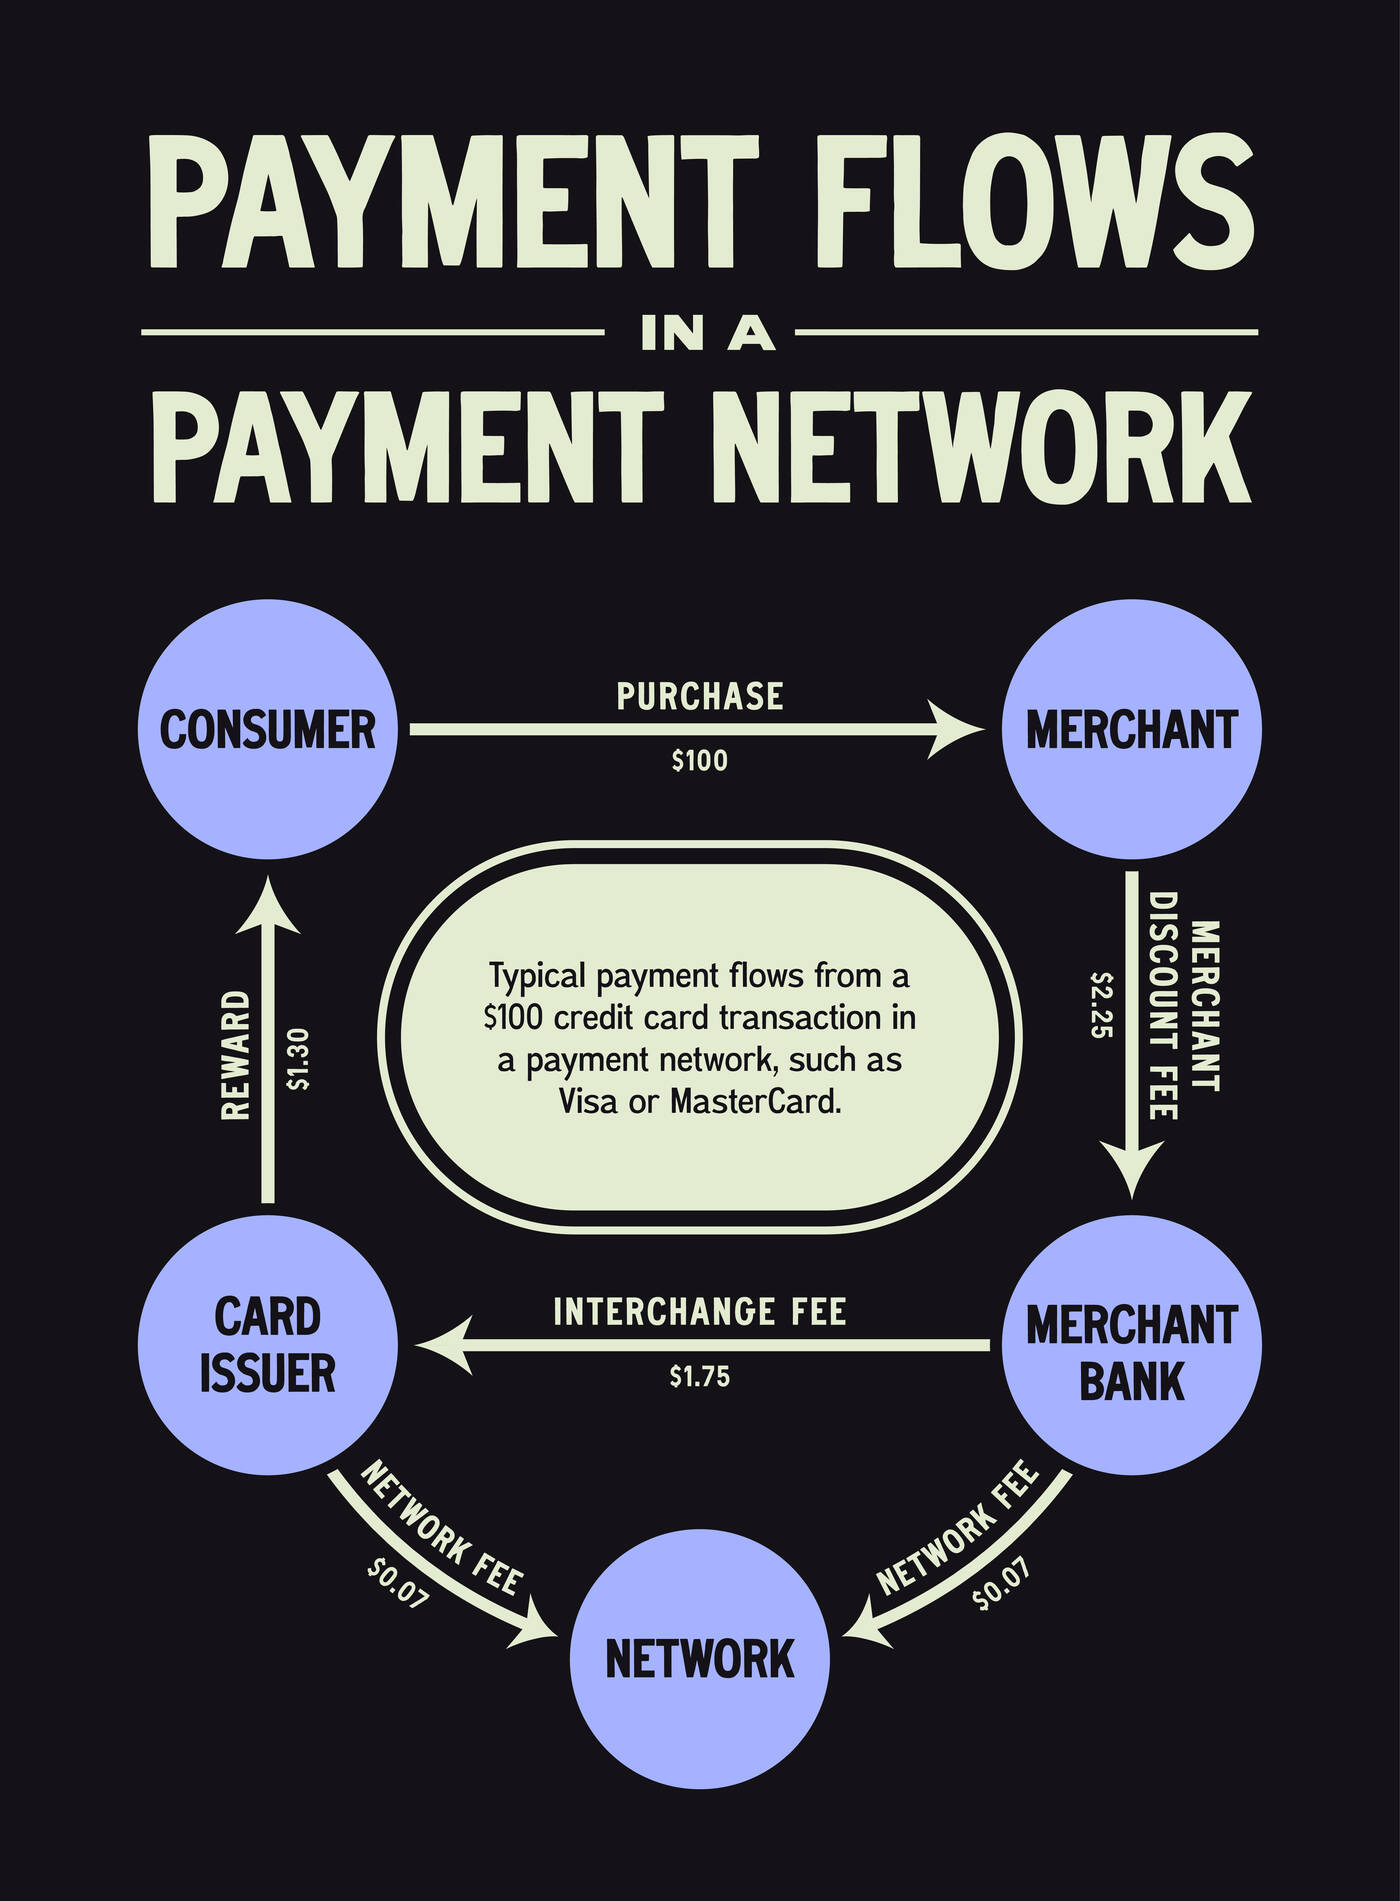 Graphic illustrating payment flows in a payment network